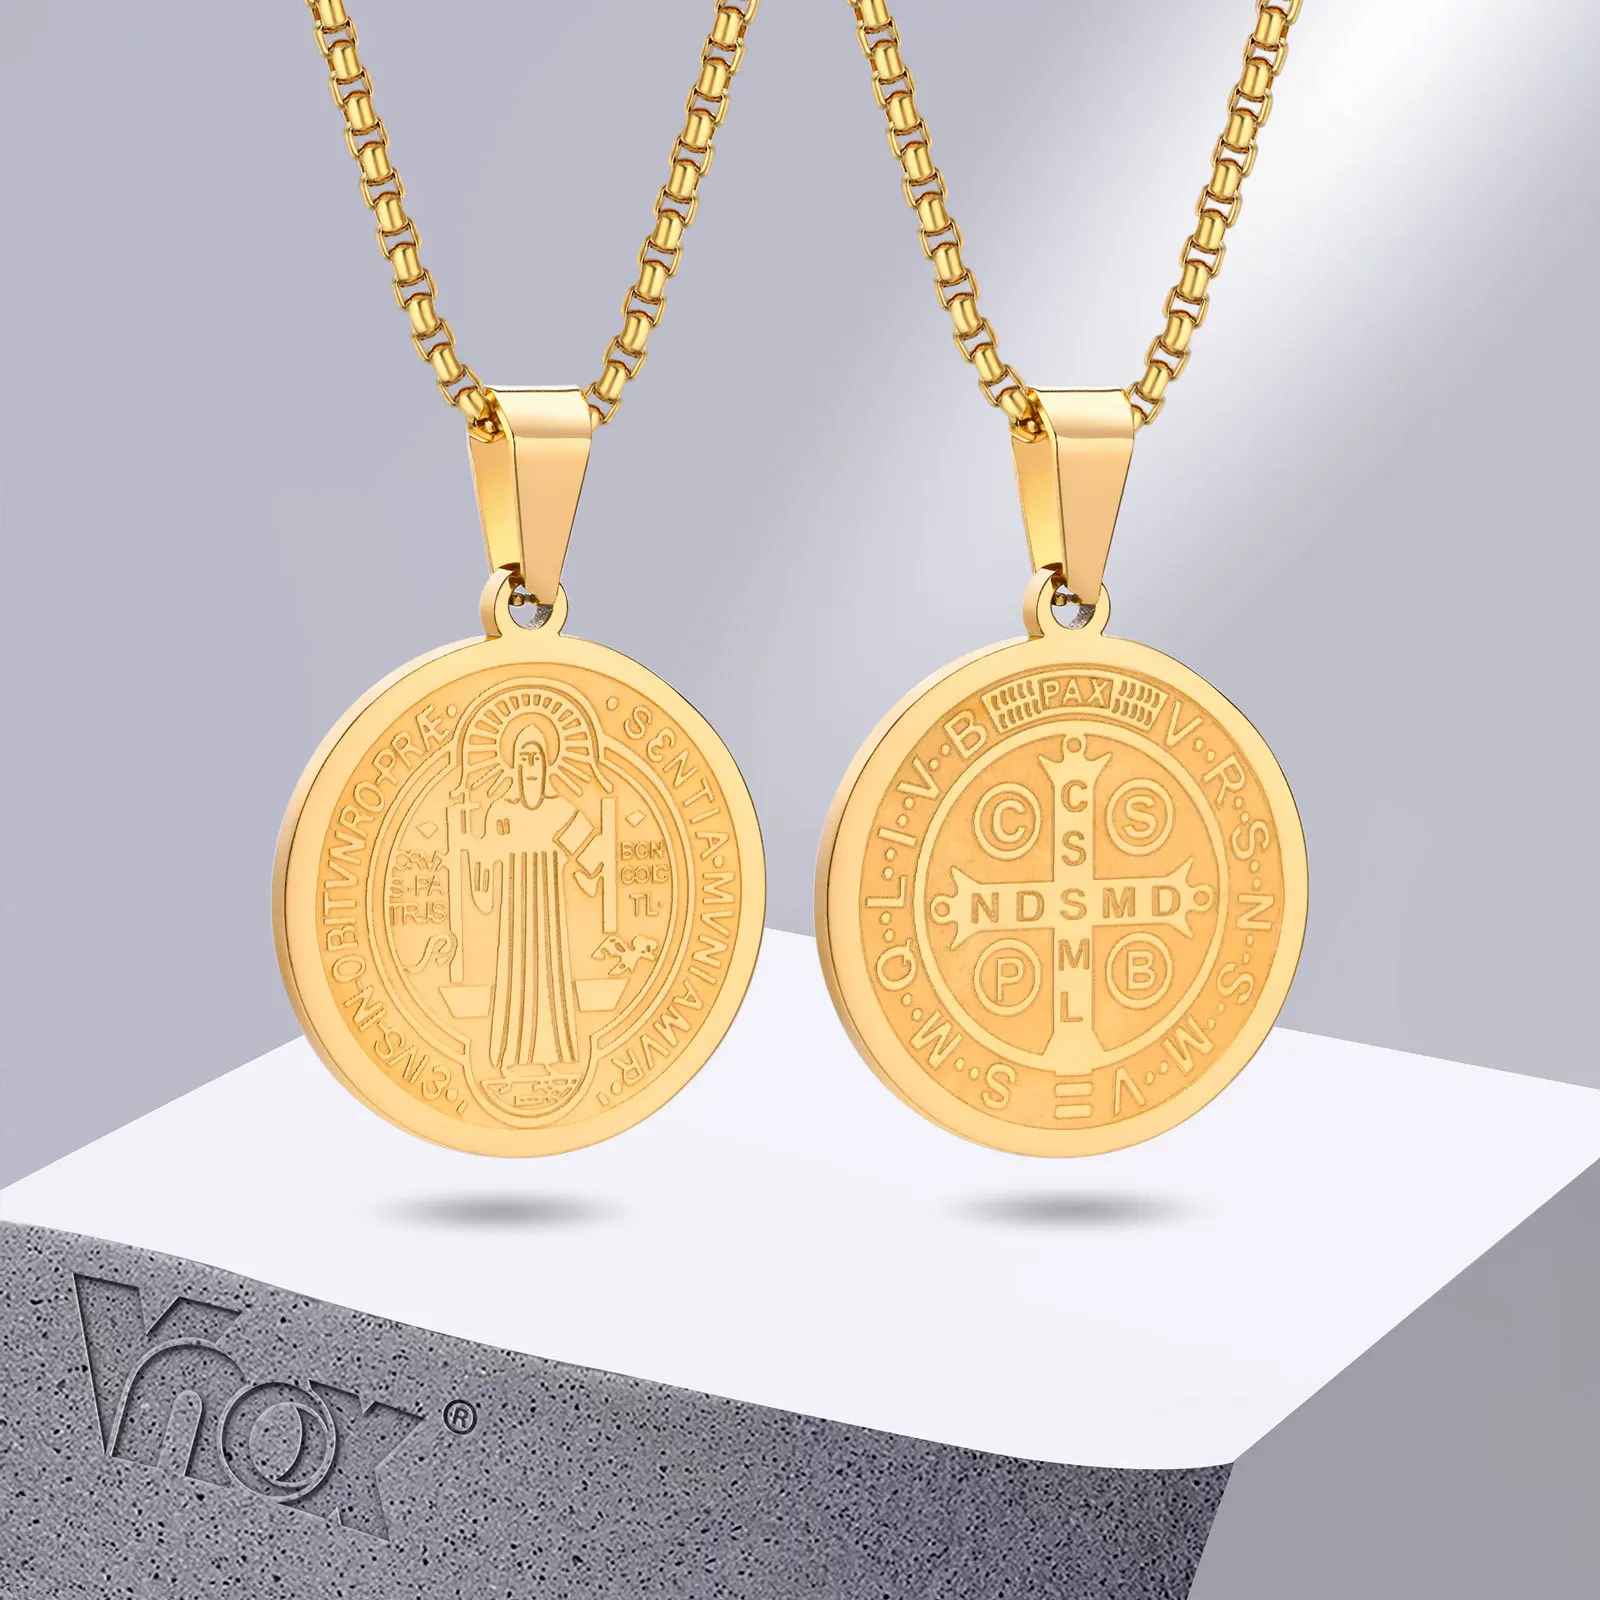 Vnox Men Saint Benedict Medal Necklace, Gold Color Stainless Steel Christian Sacramental Catholic Jewelry Gift,with Box Chain